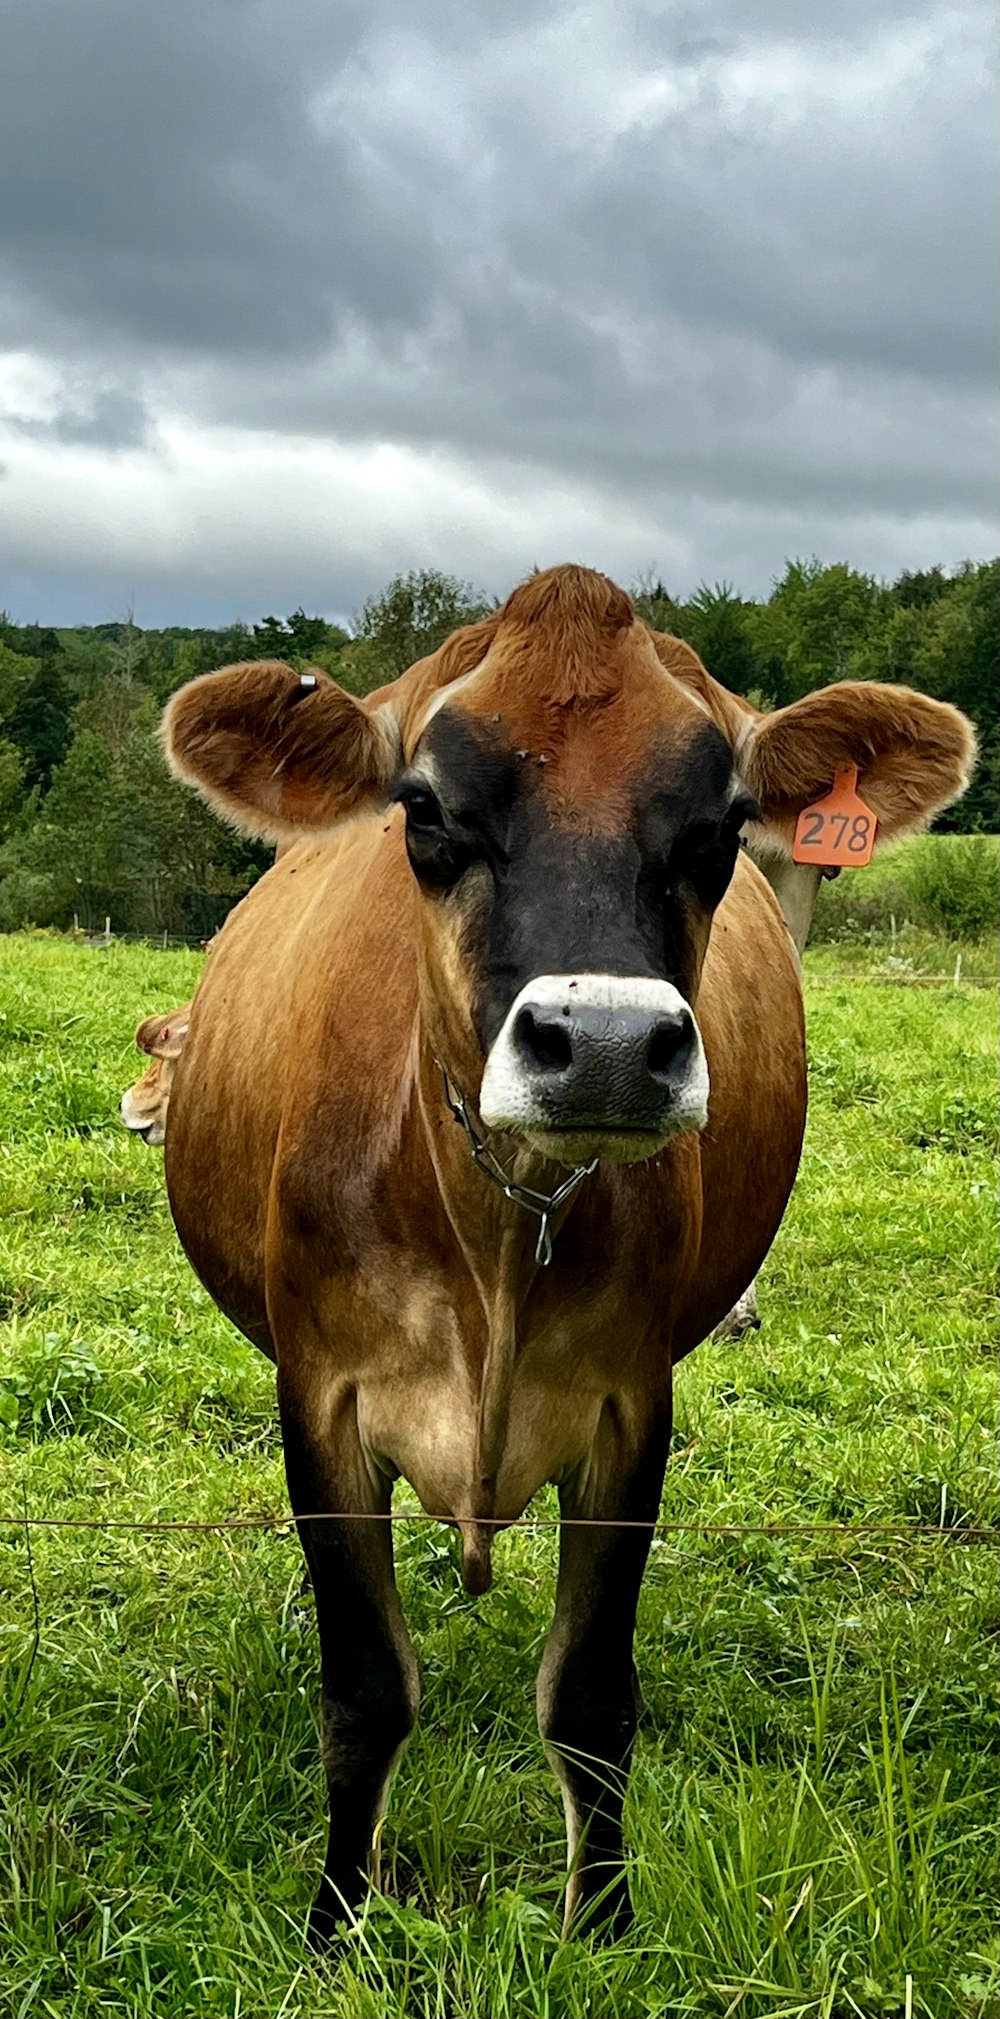 a brown cow standing on top of a lush green field